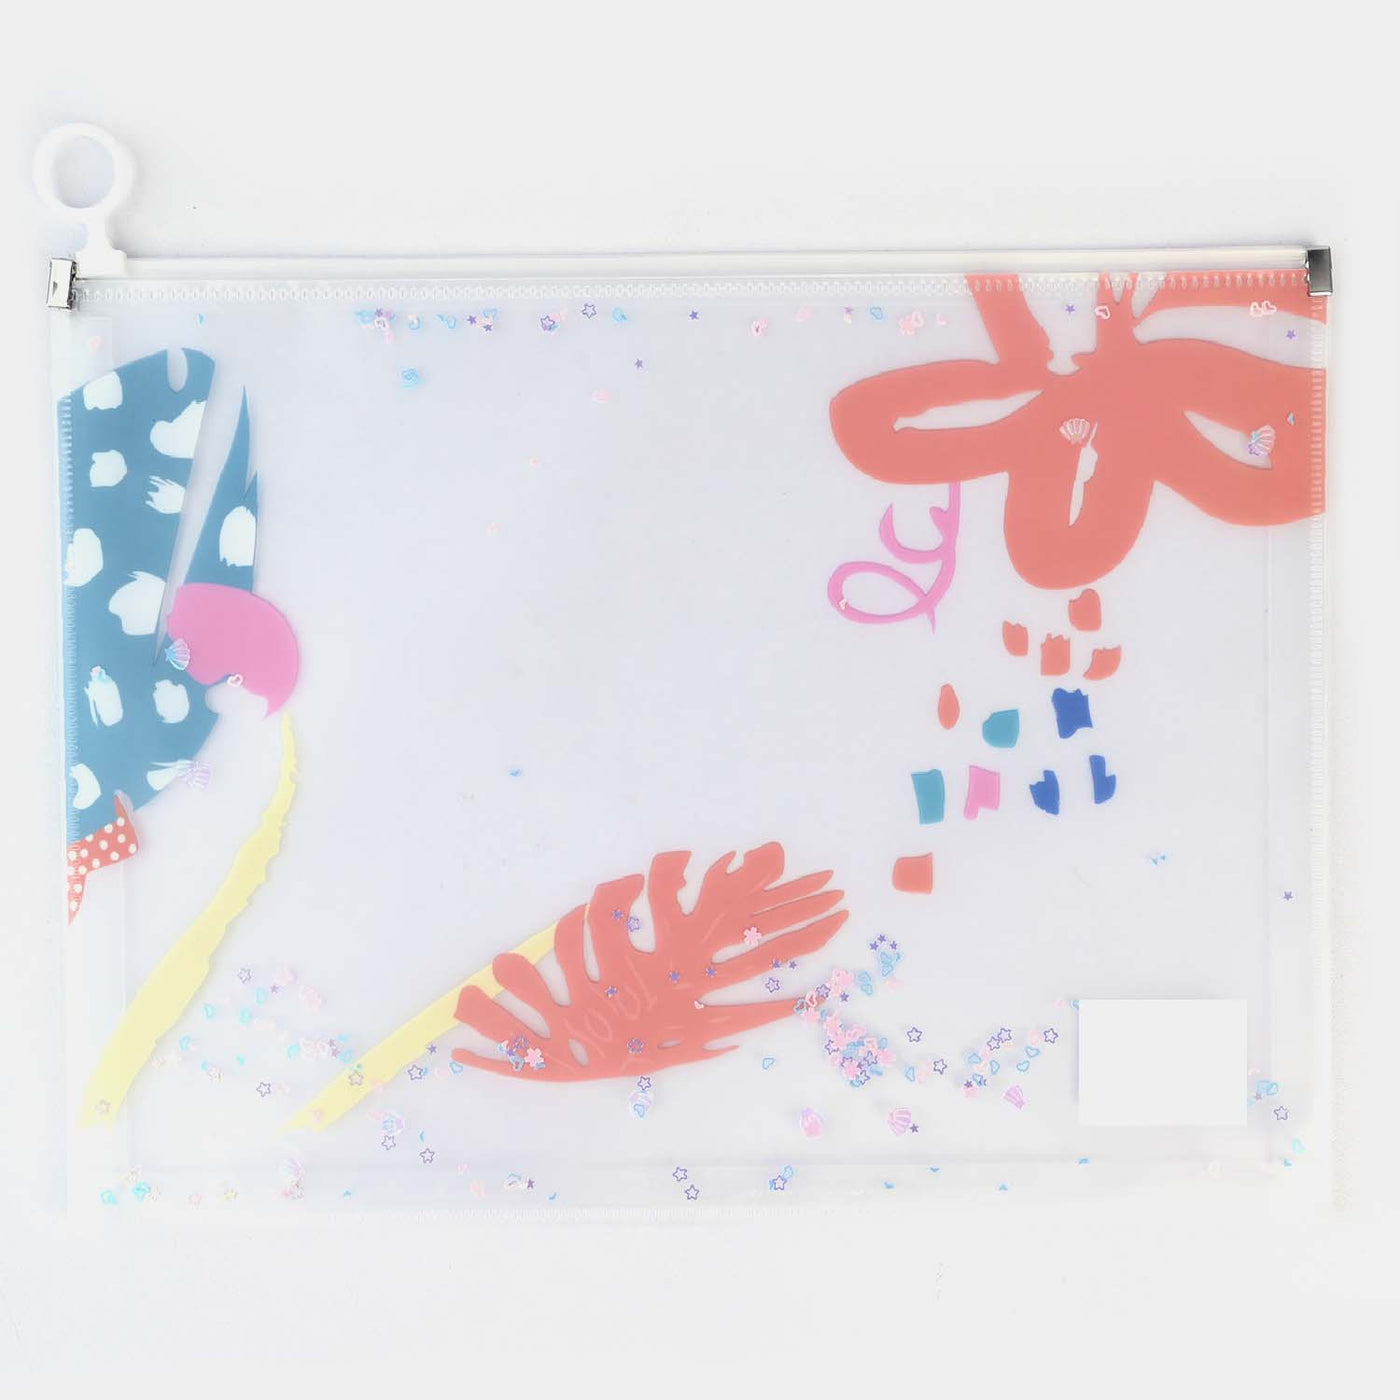 Cute & Stylish Transparent Pouch For Kids